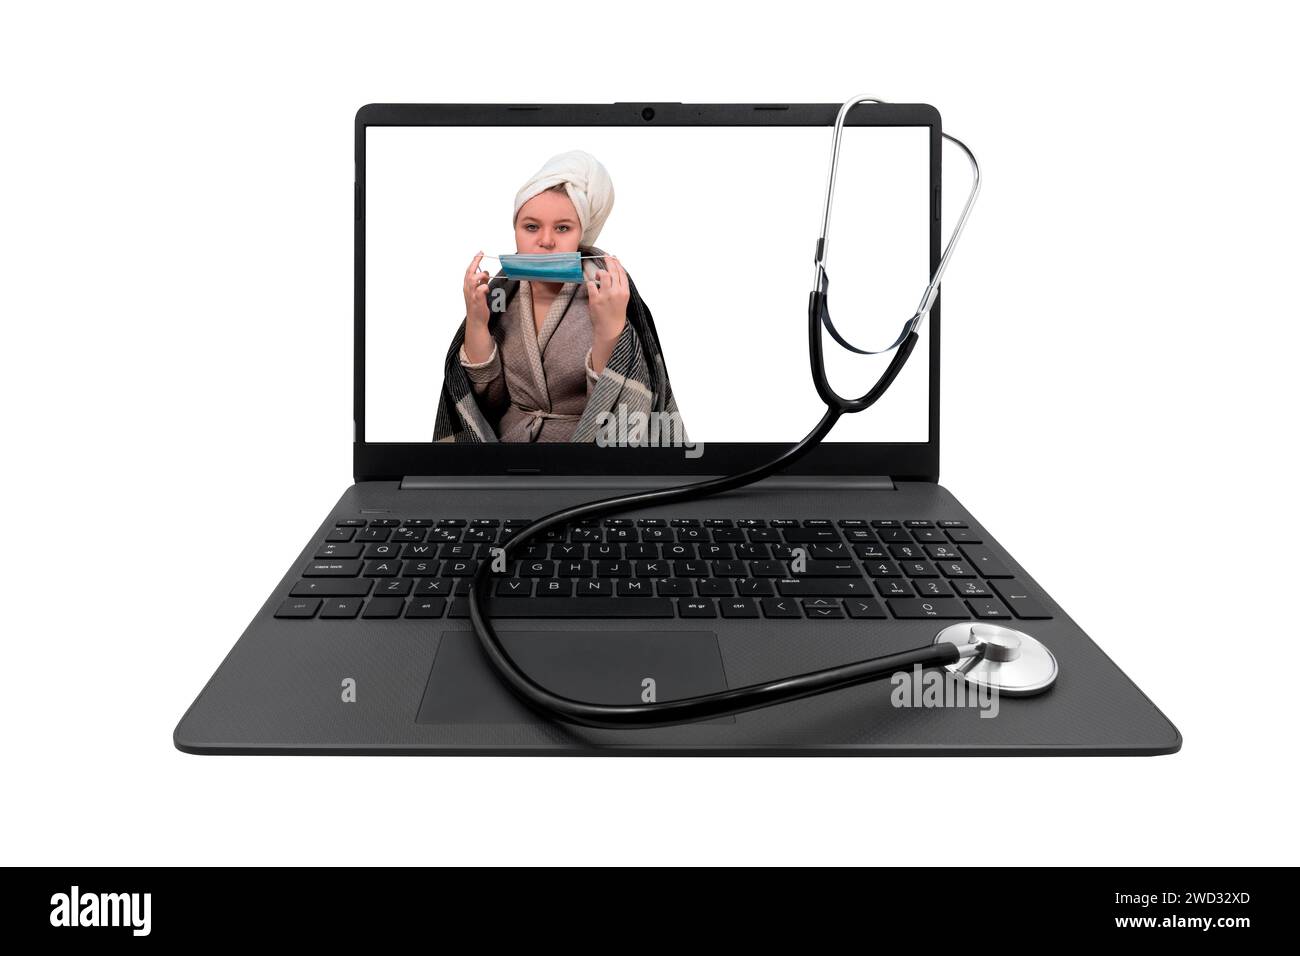 Laptop and medical stethoscope isolated on white background. On laptop screen - a girl with cold symptoms puts a protective medical mask on her face Stock Photo